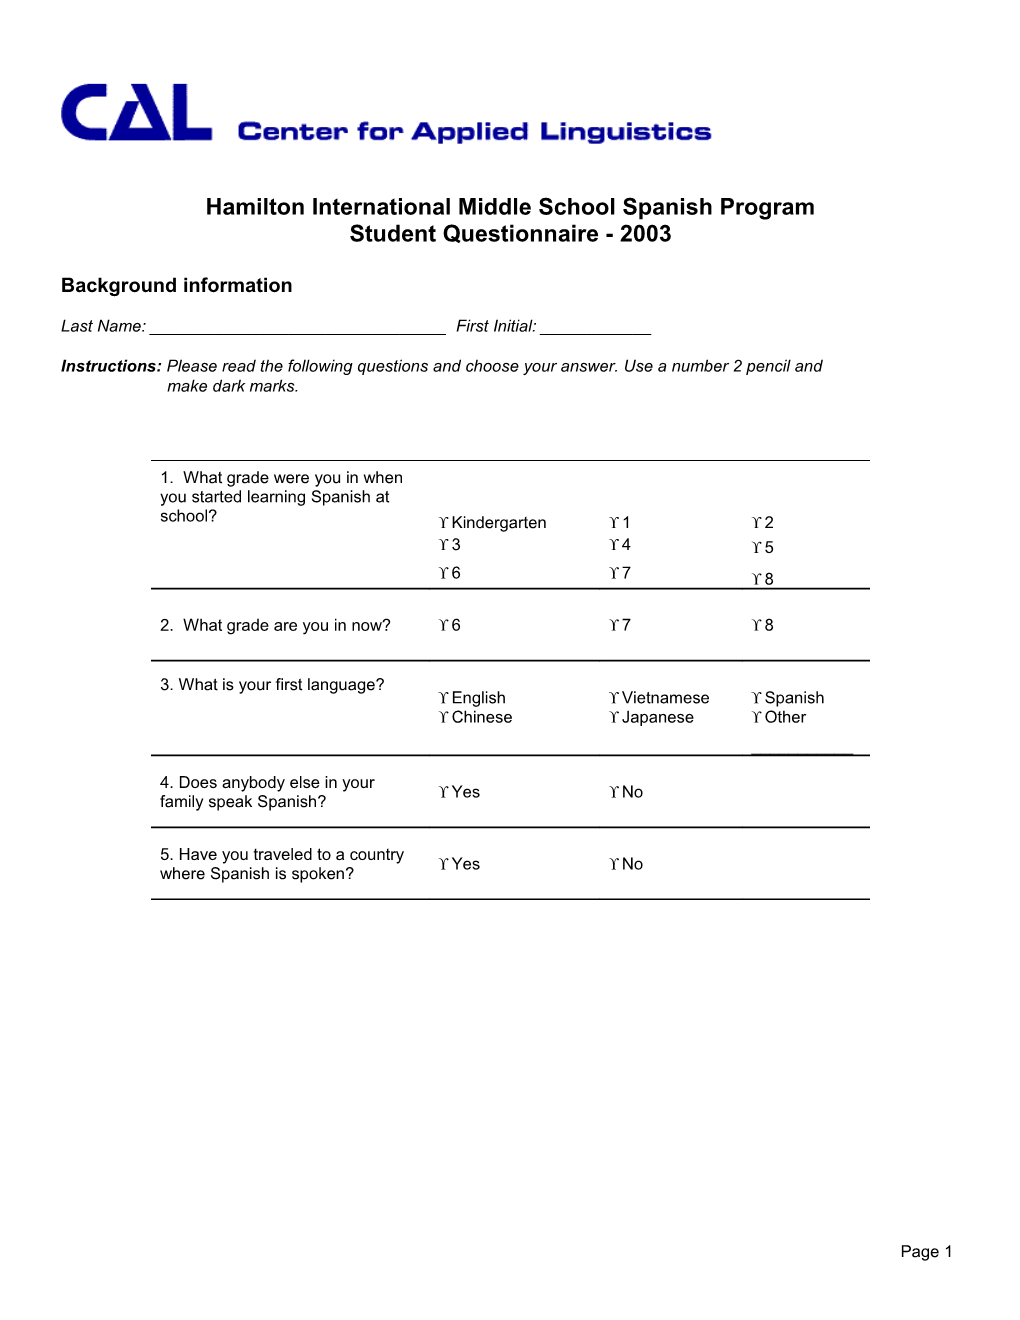 Student Self-Assessment for Middle School